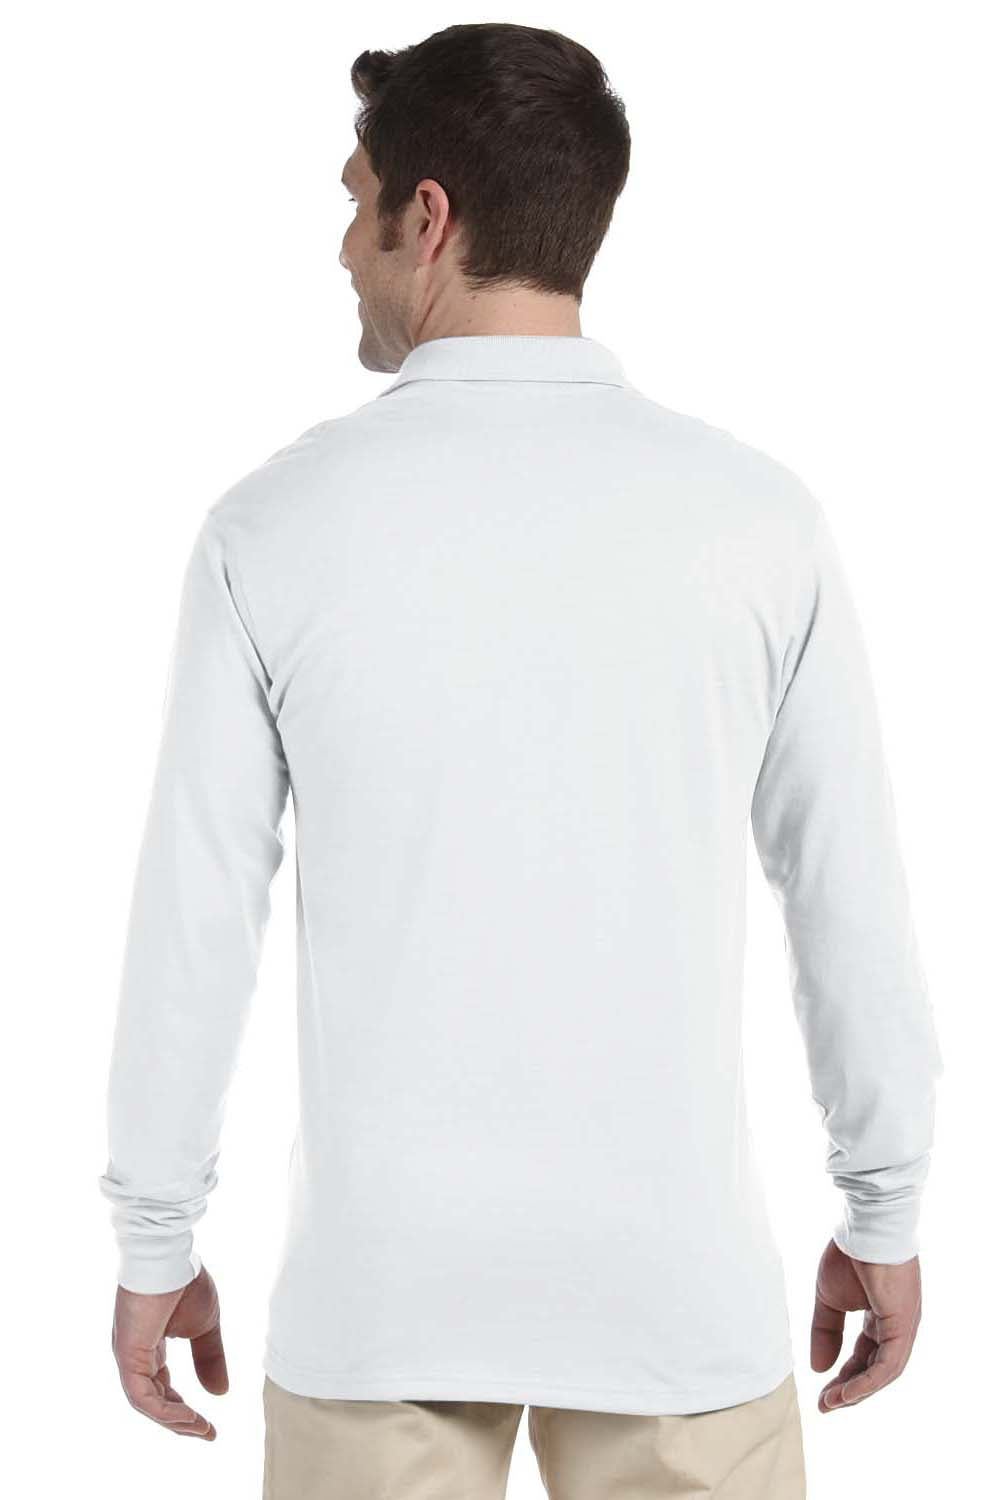 Jerzees 437ML Mens SpotShield Stain Resistant Long Sleeve Polo Shirt White Back